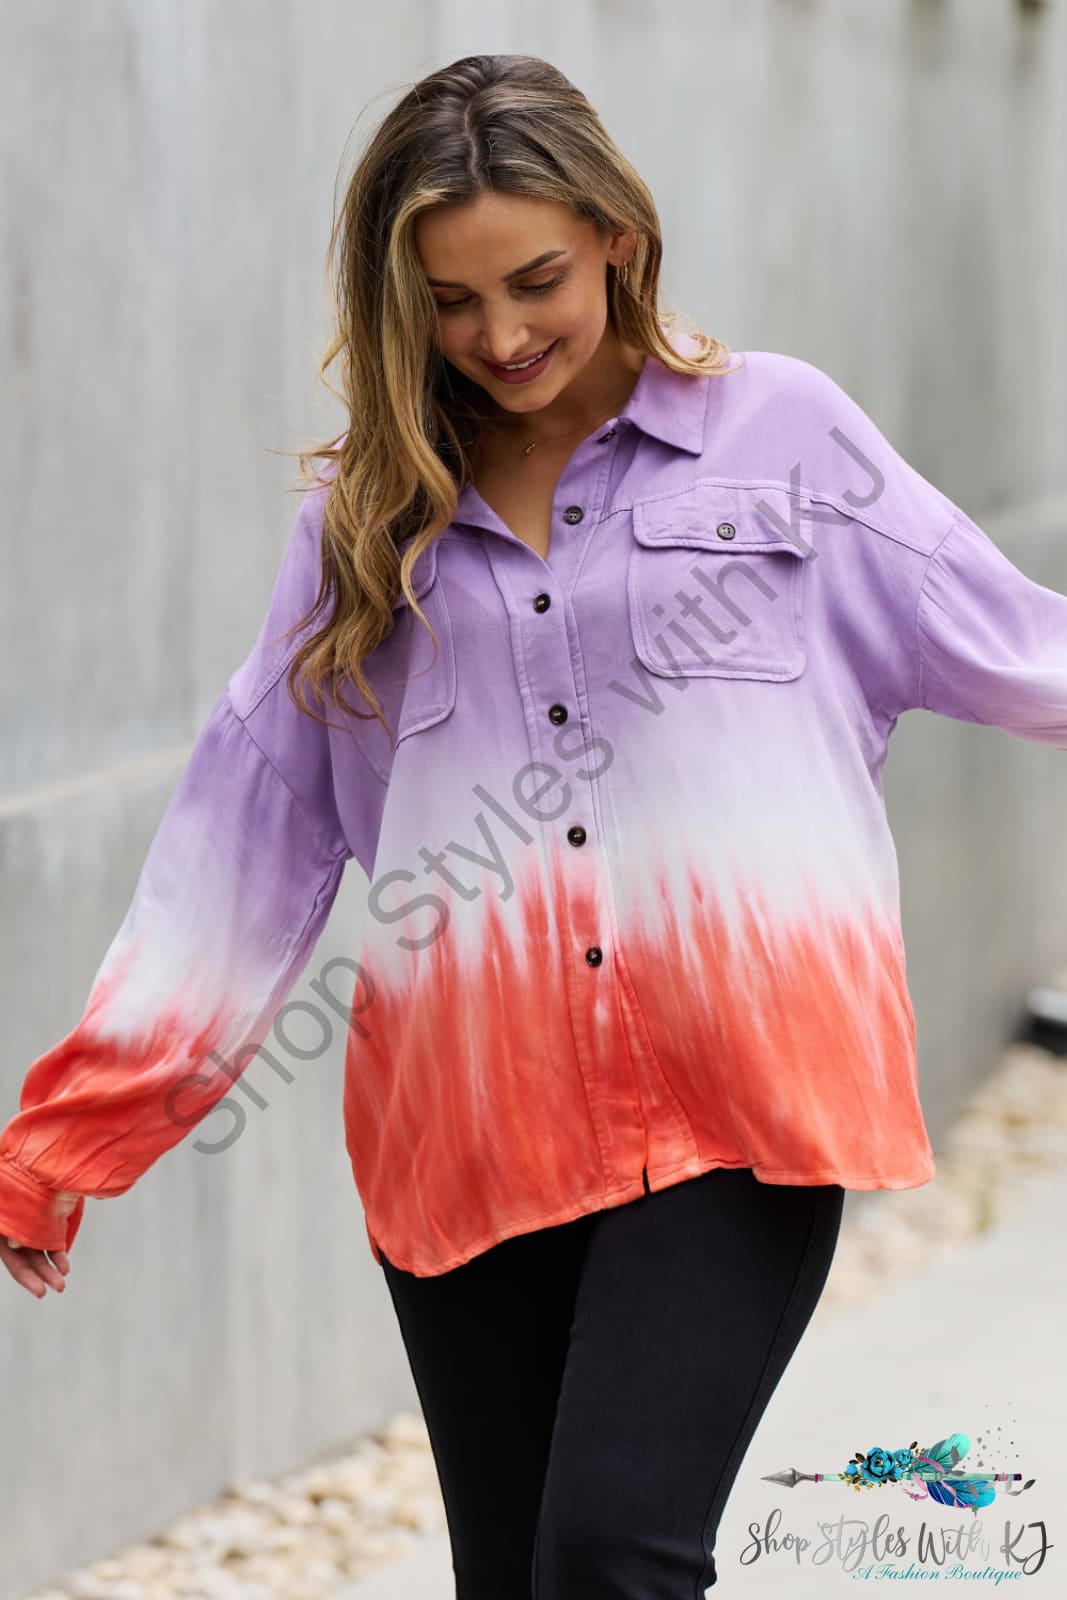 White Birch Relaxed Fit Tie-Dye Button Down Top Shirts & Tops